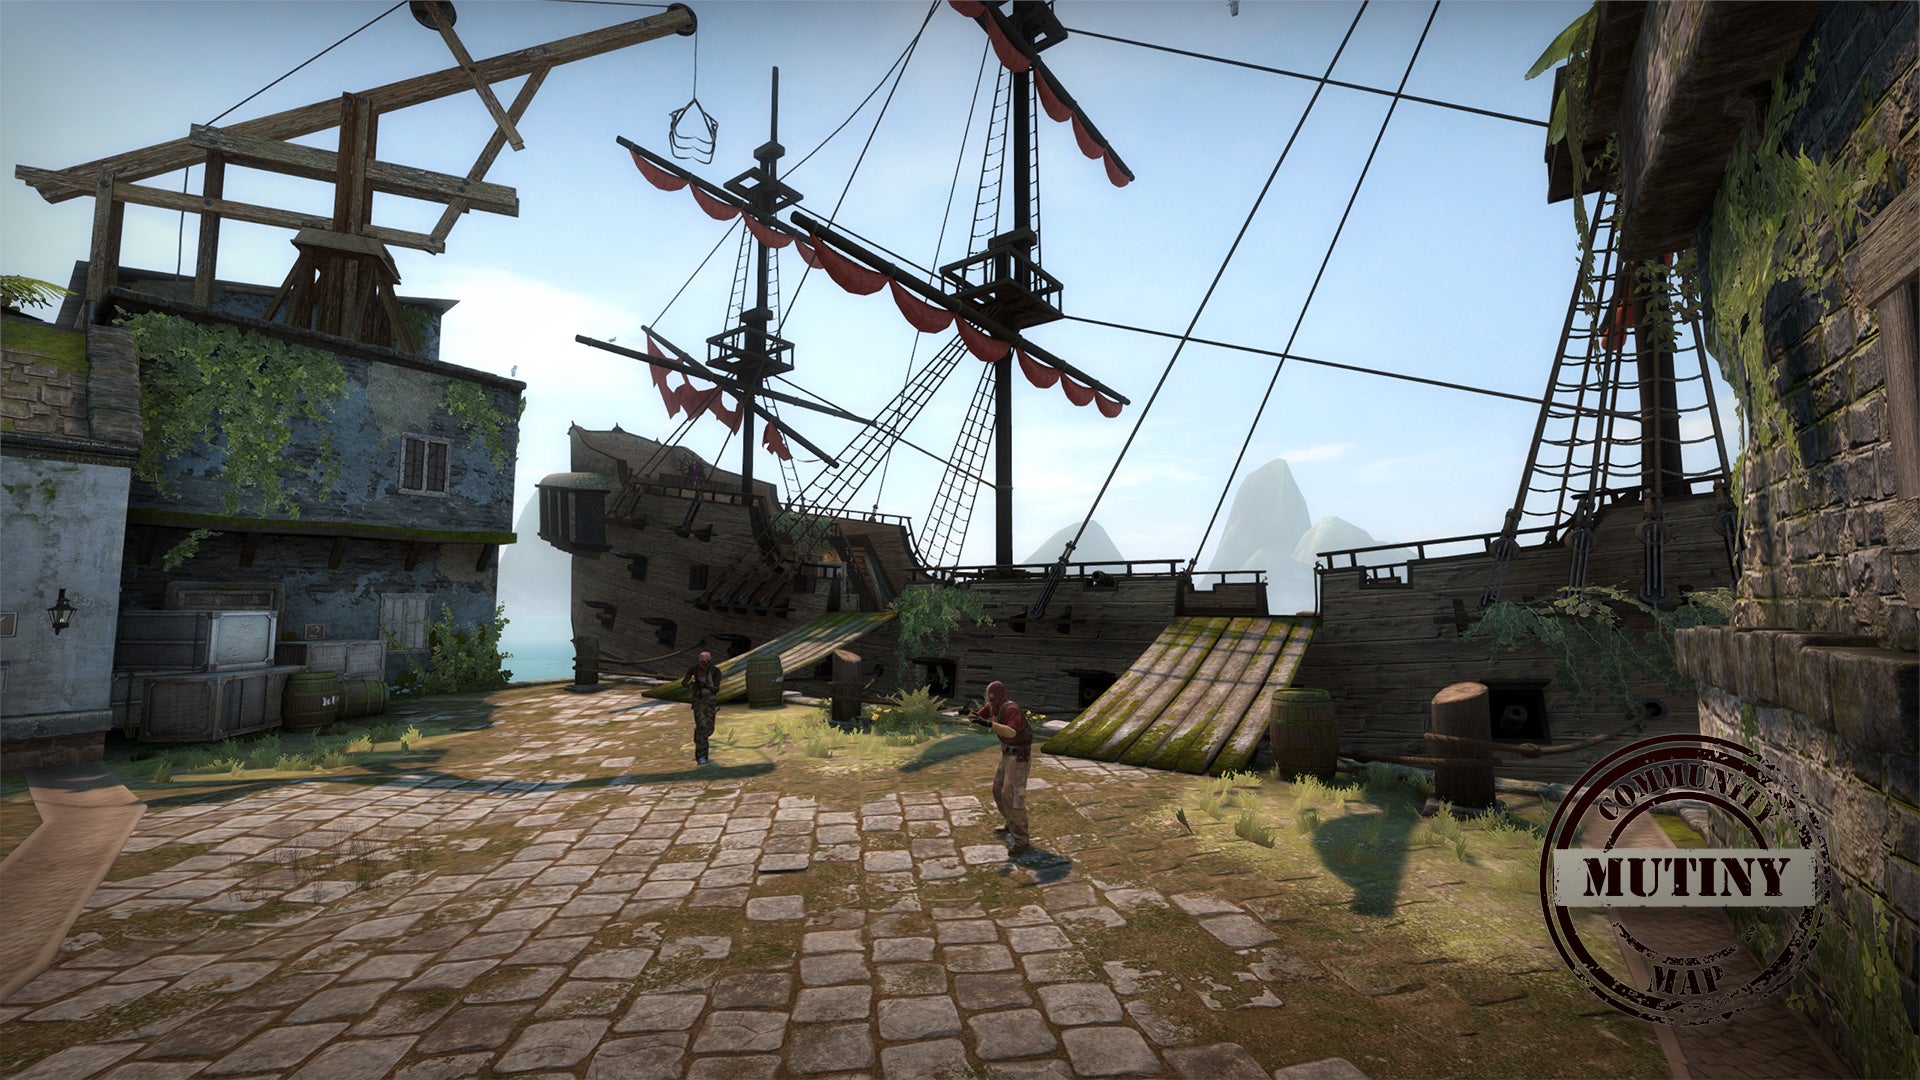 Image for Counter-Strike: GO has swapped in a couple of player-made maps